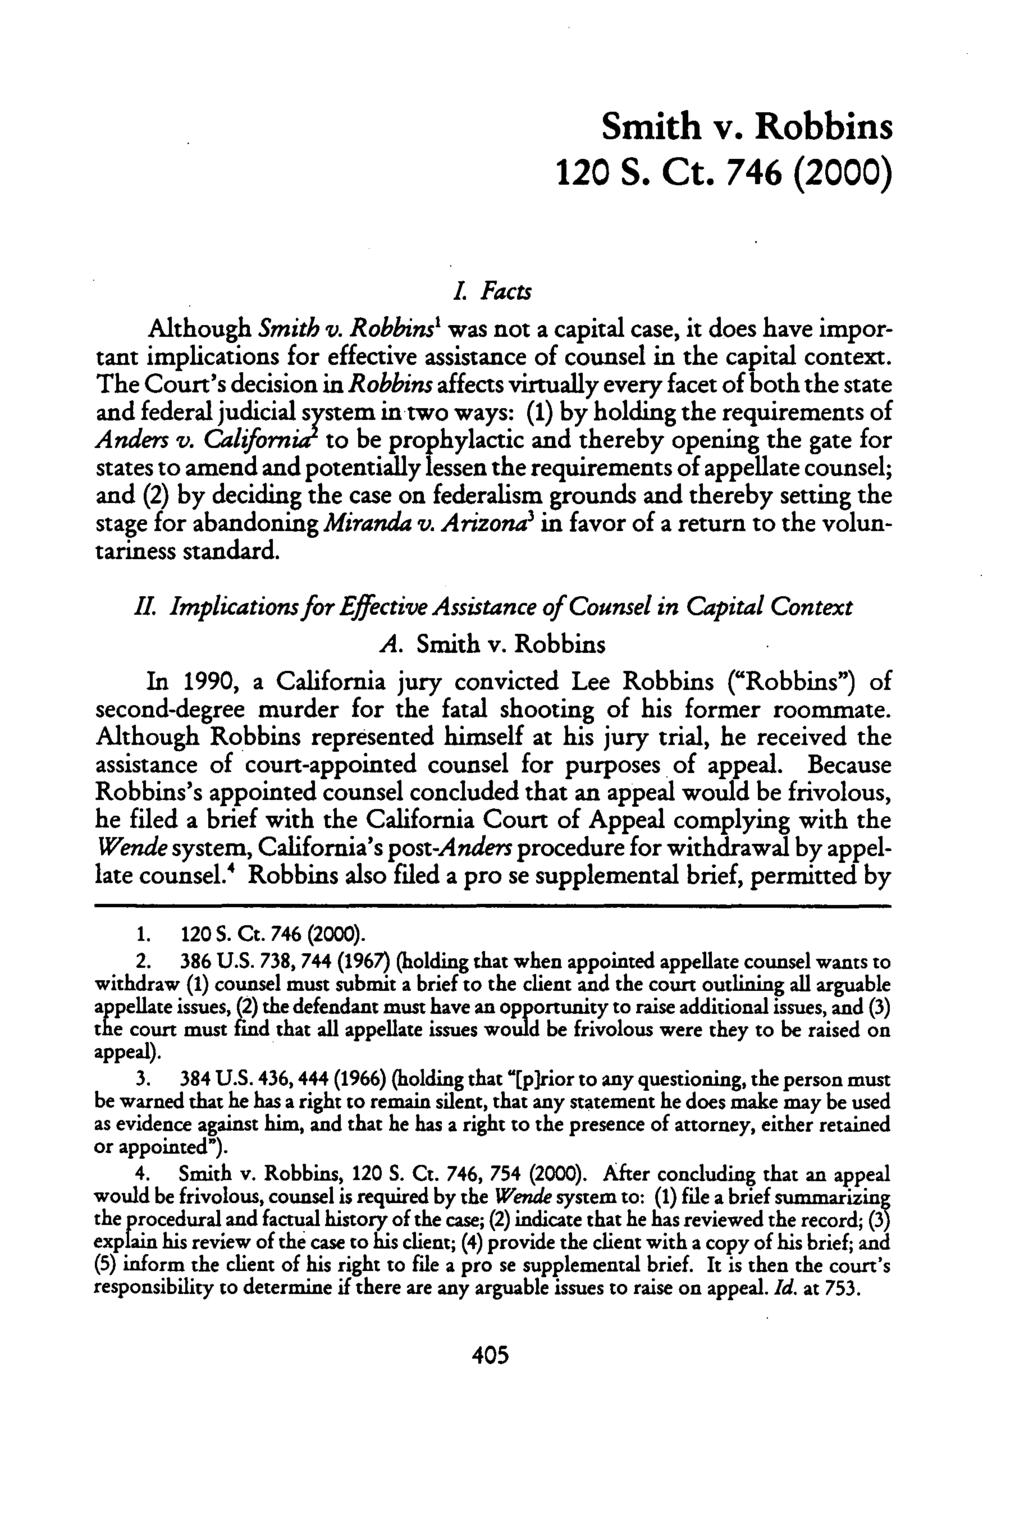 Smith v. Robbins 120 S. Ct. 746 (2000) L Facts Although Smith v. Robbins' was not a capital case, it does have important implications for effective assistance of counsel in the capital context.